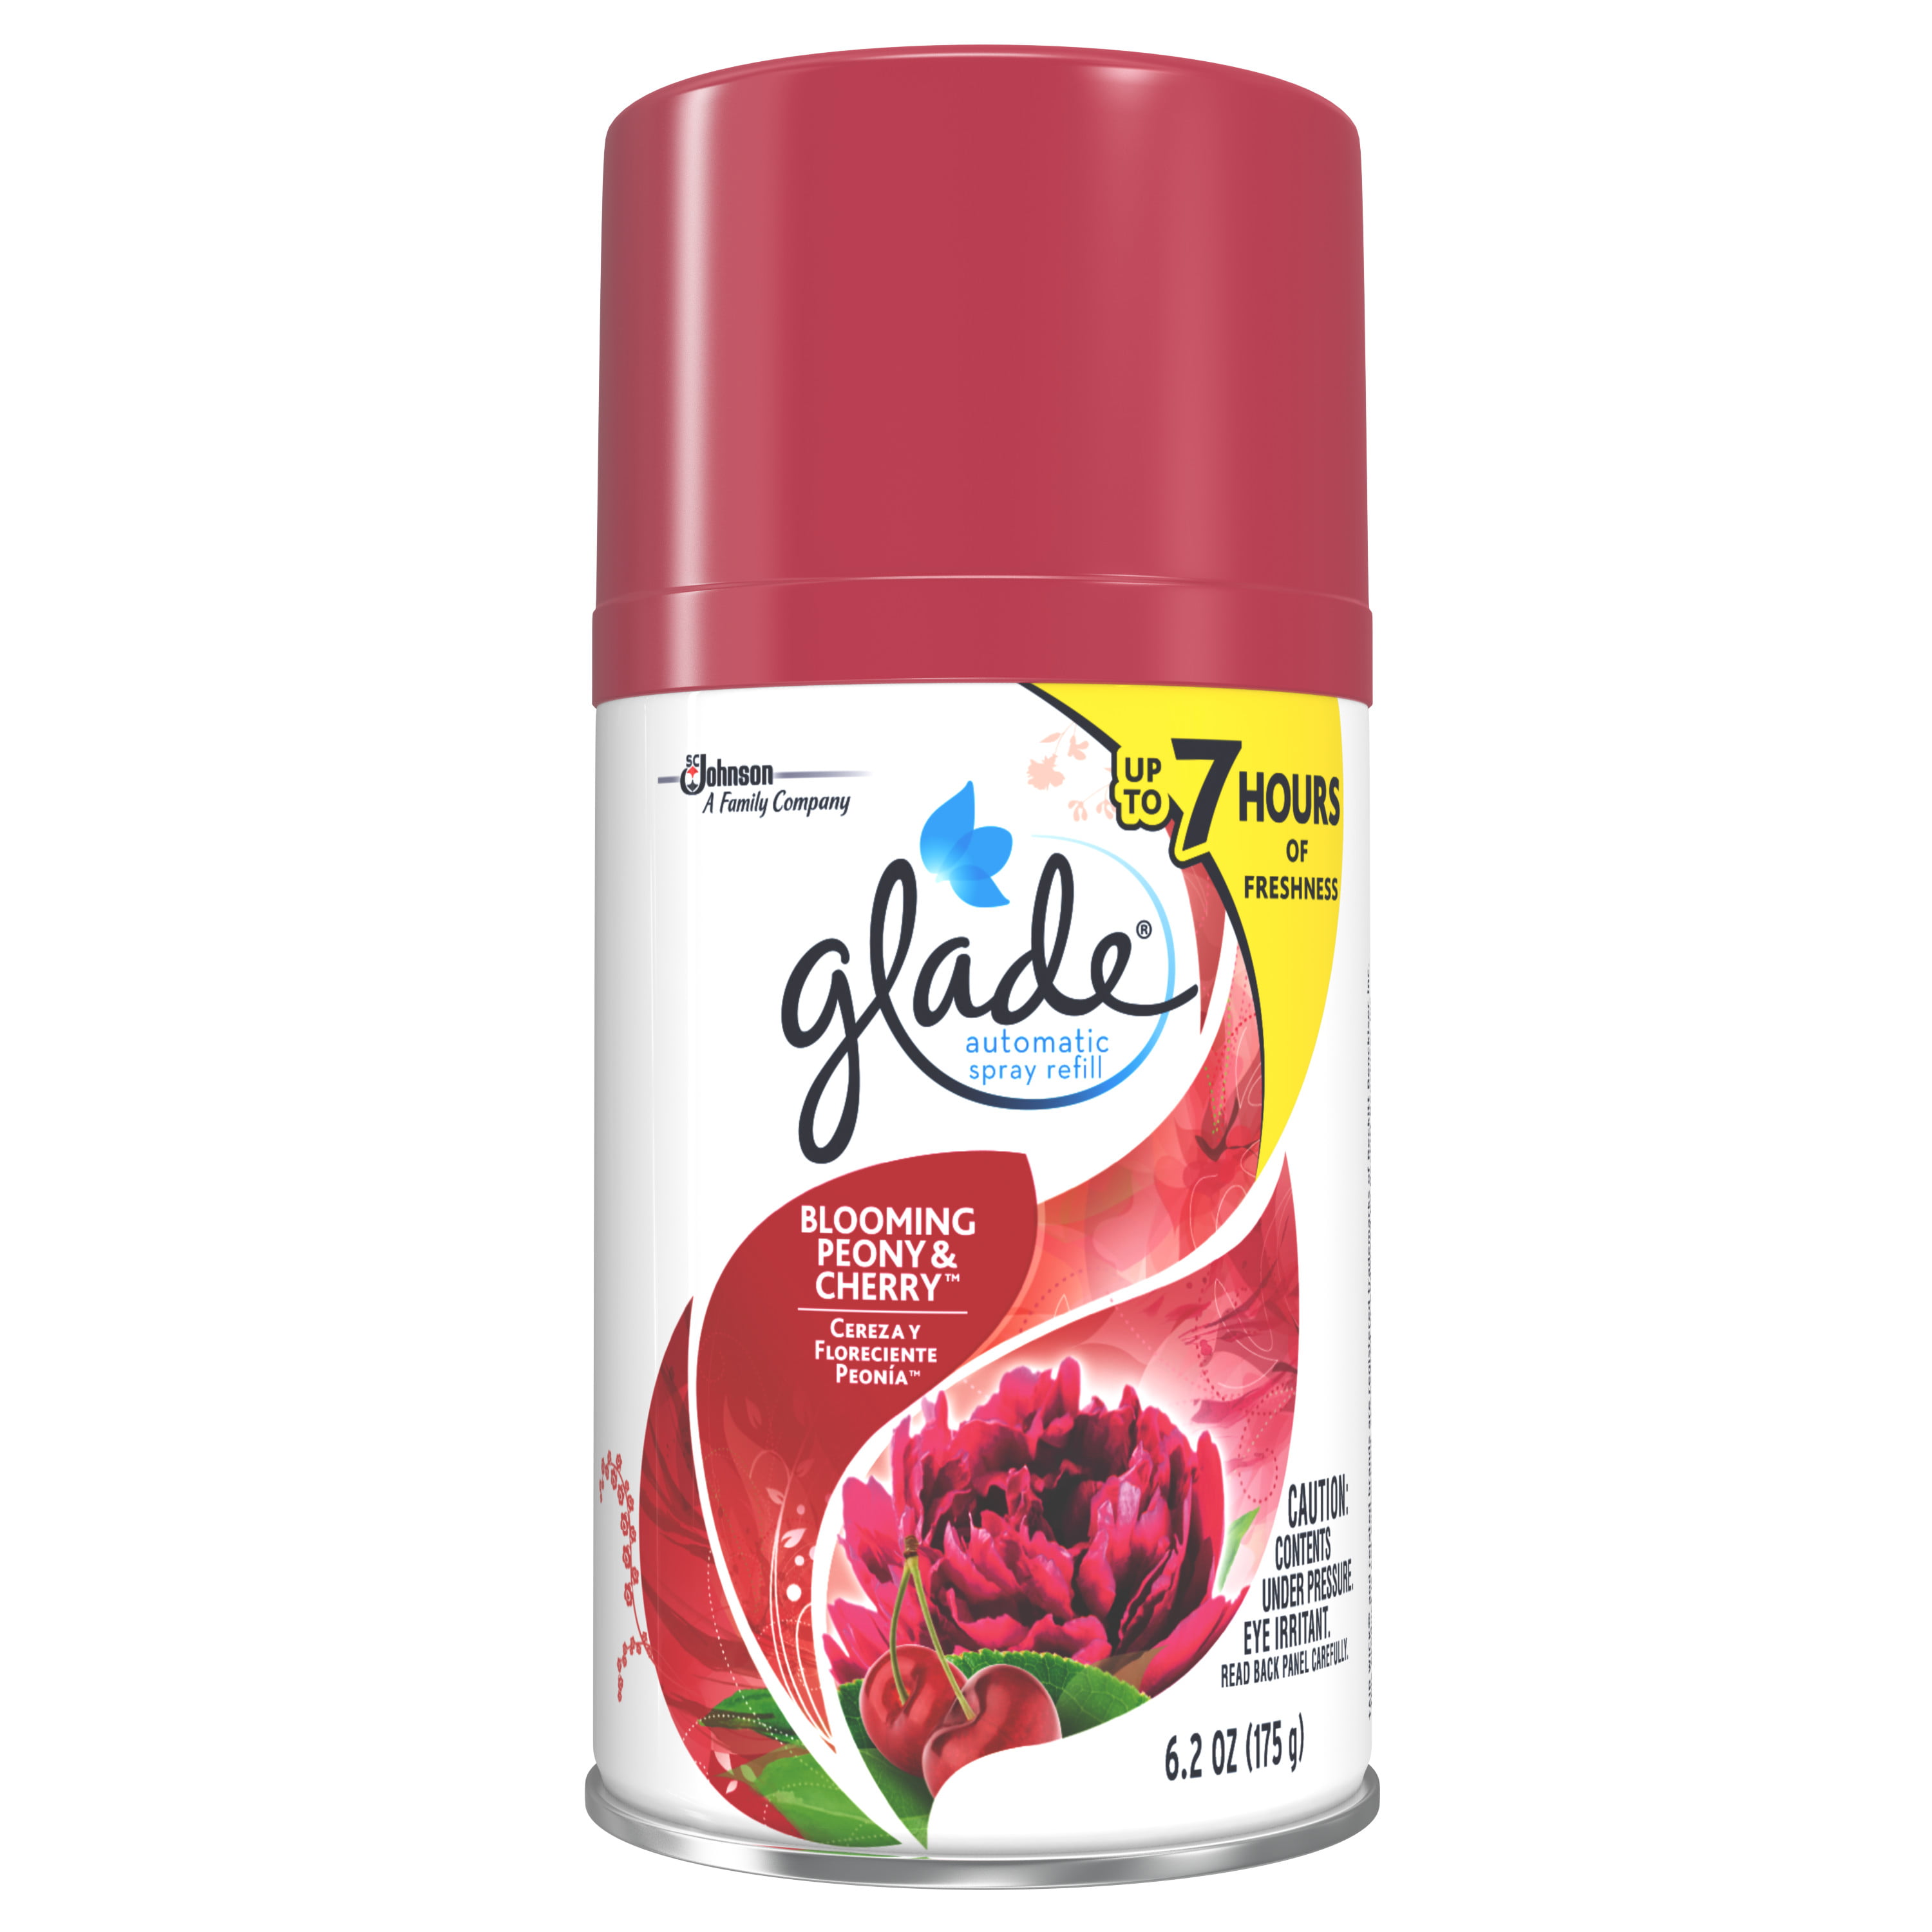 Glade Automatic Spray Air Freshener Refill, Blooming Peony ...